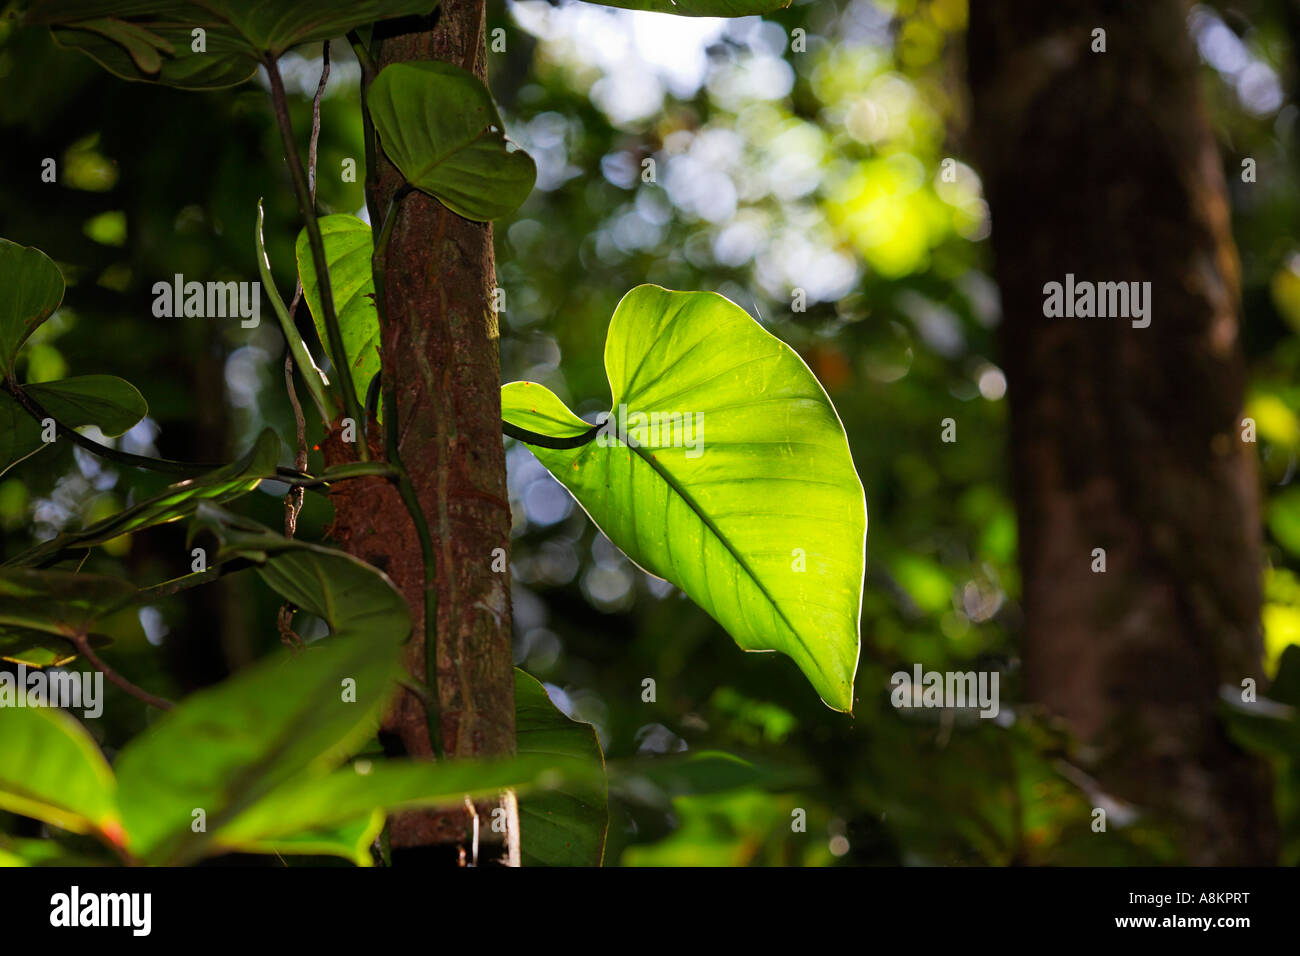 Leaf of Philodendron in rainforest, Costa Rica Stock Photo